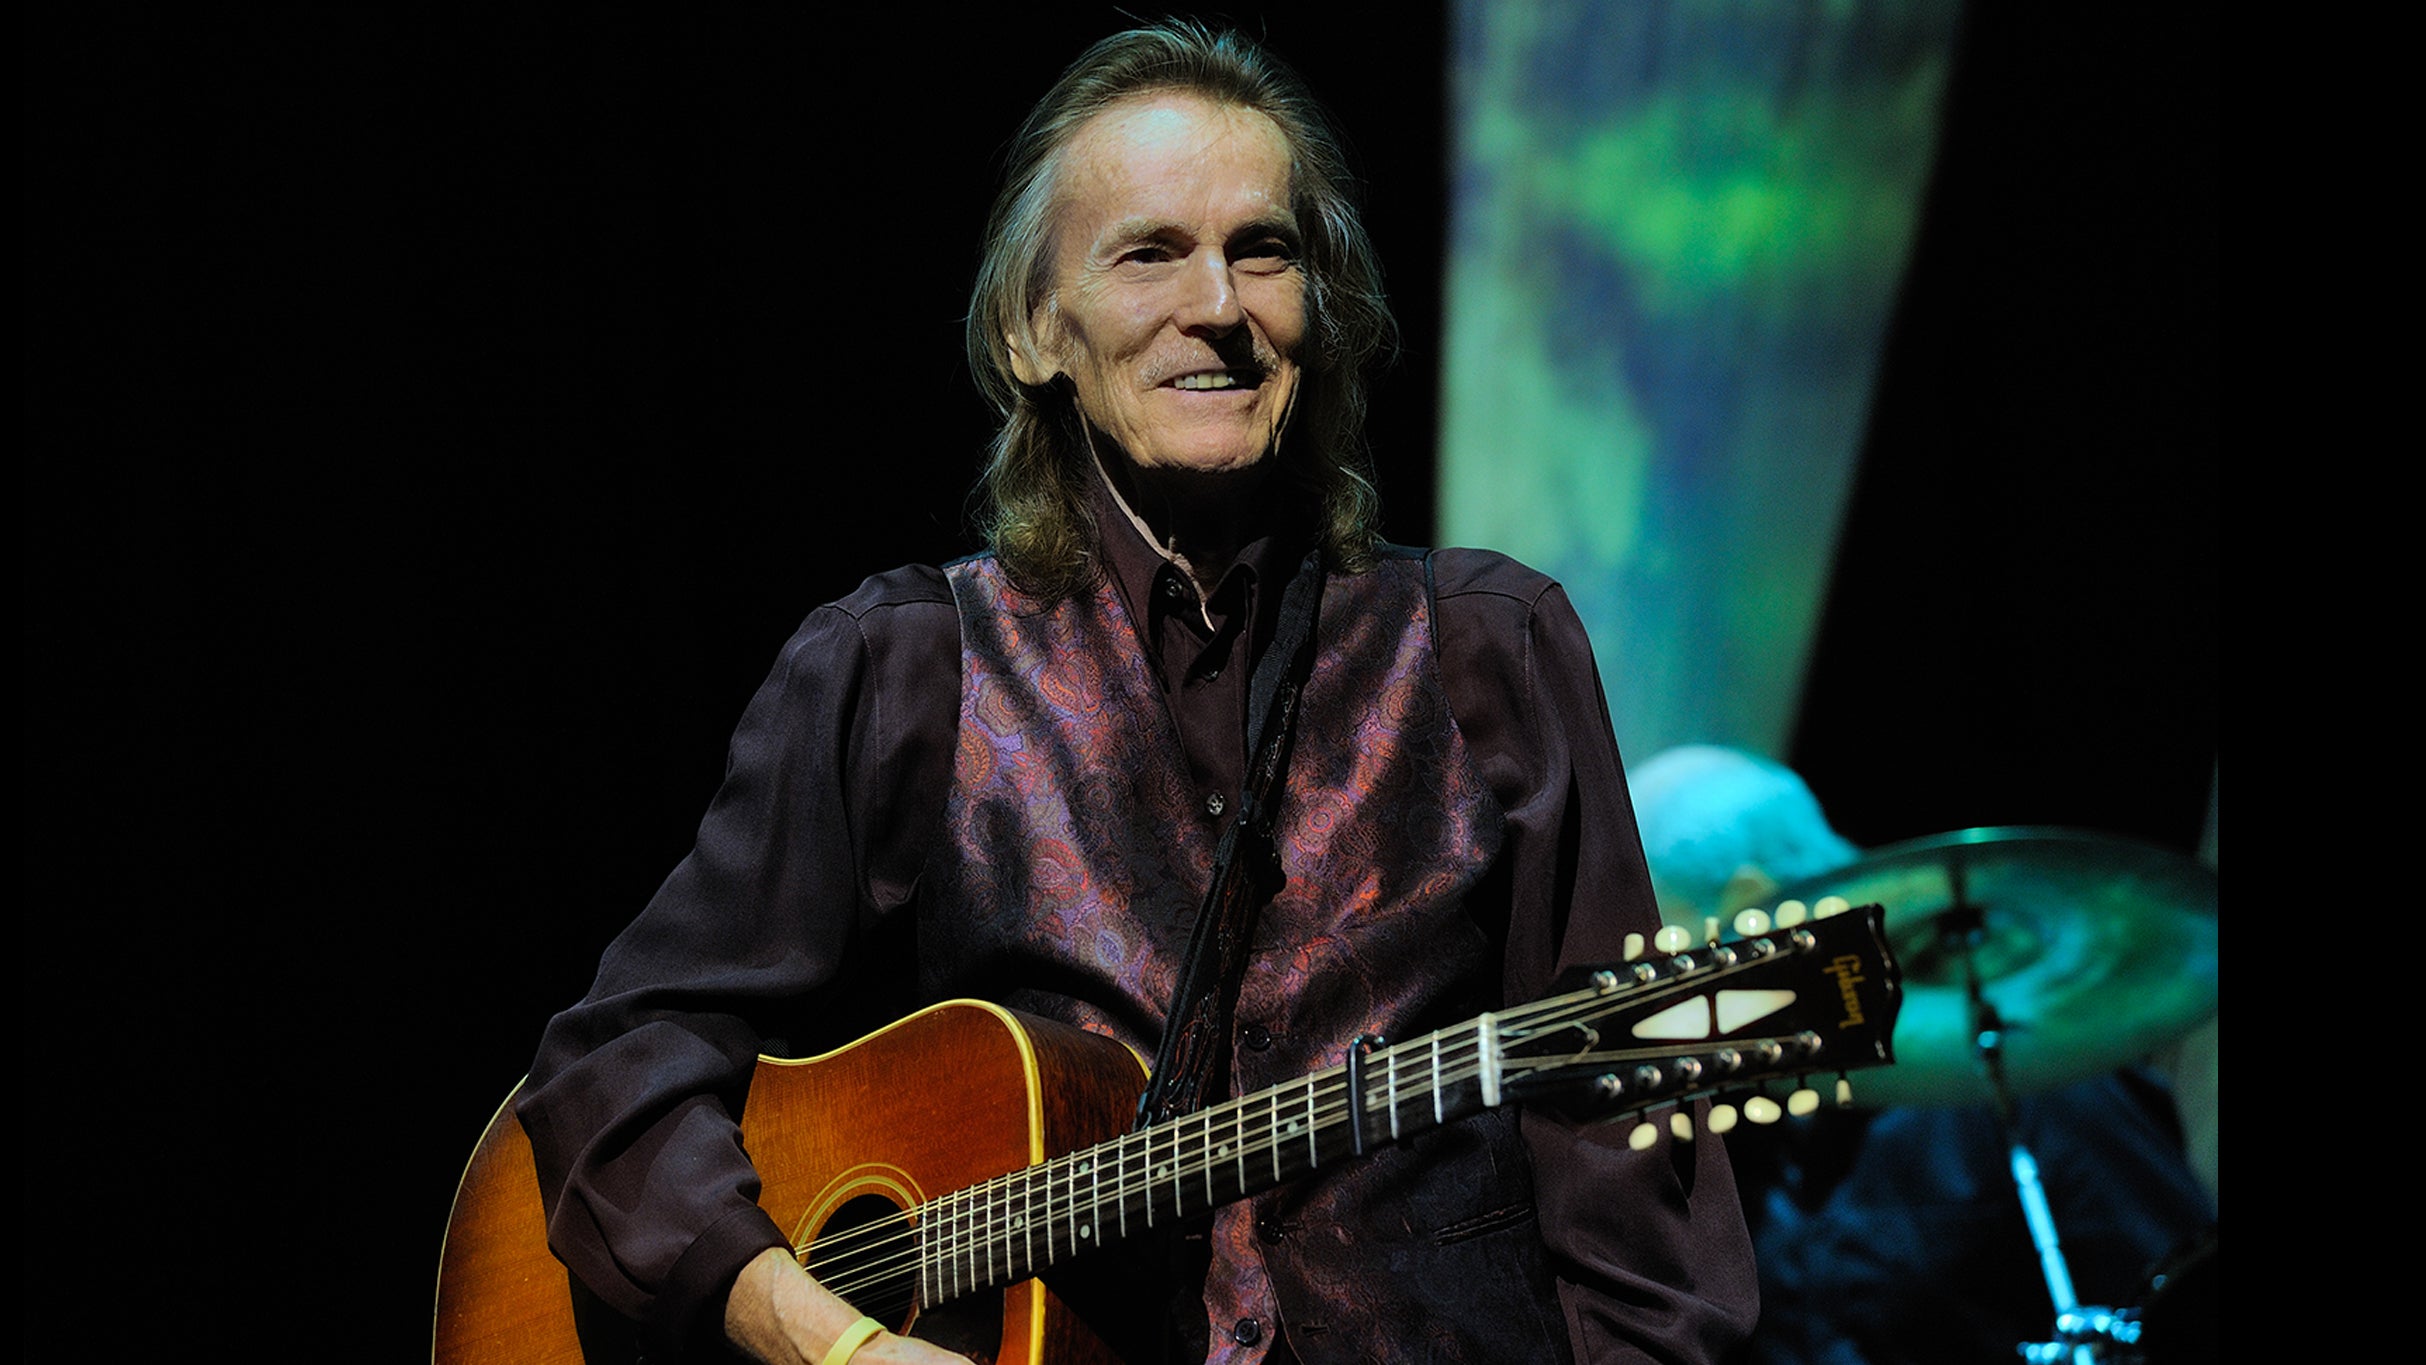 Gordon Lightfoot: The Legend In Concert in Peoria promo photo for DZP presale offer code